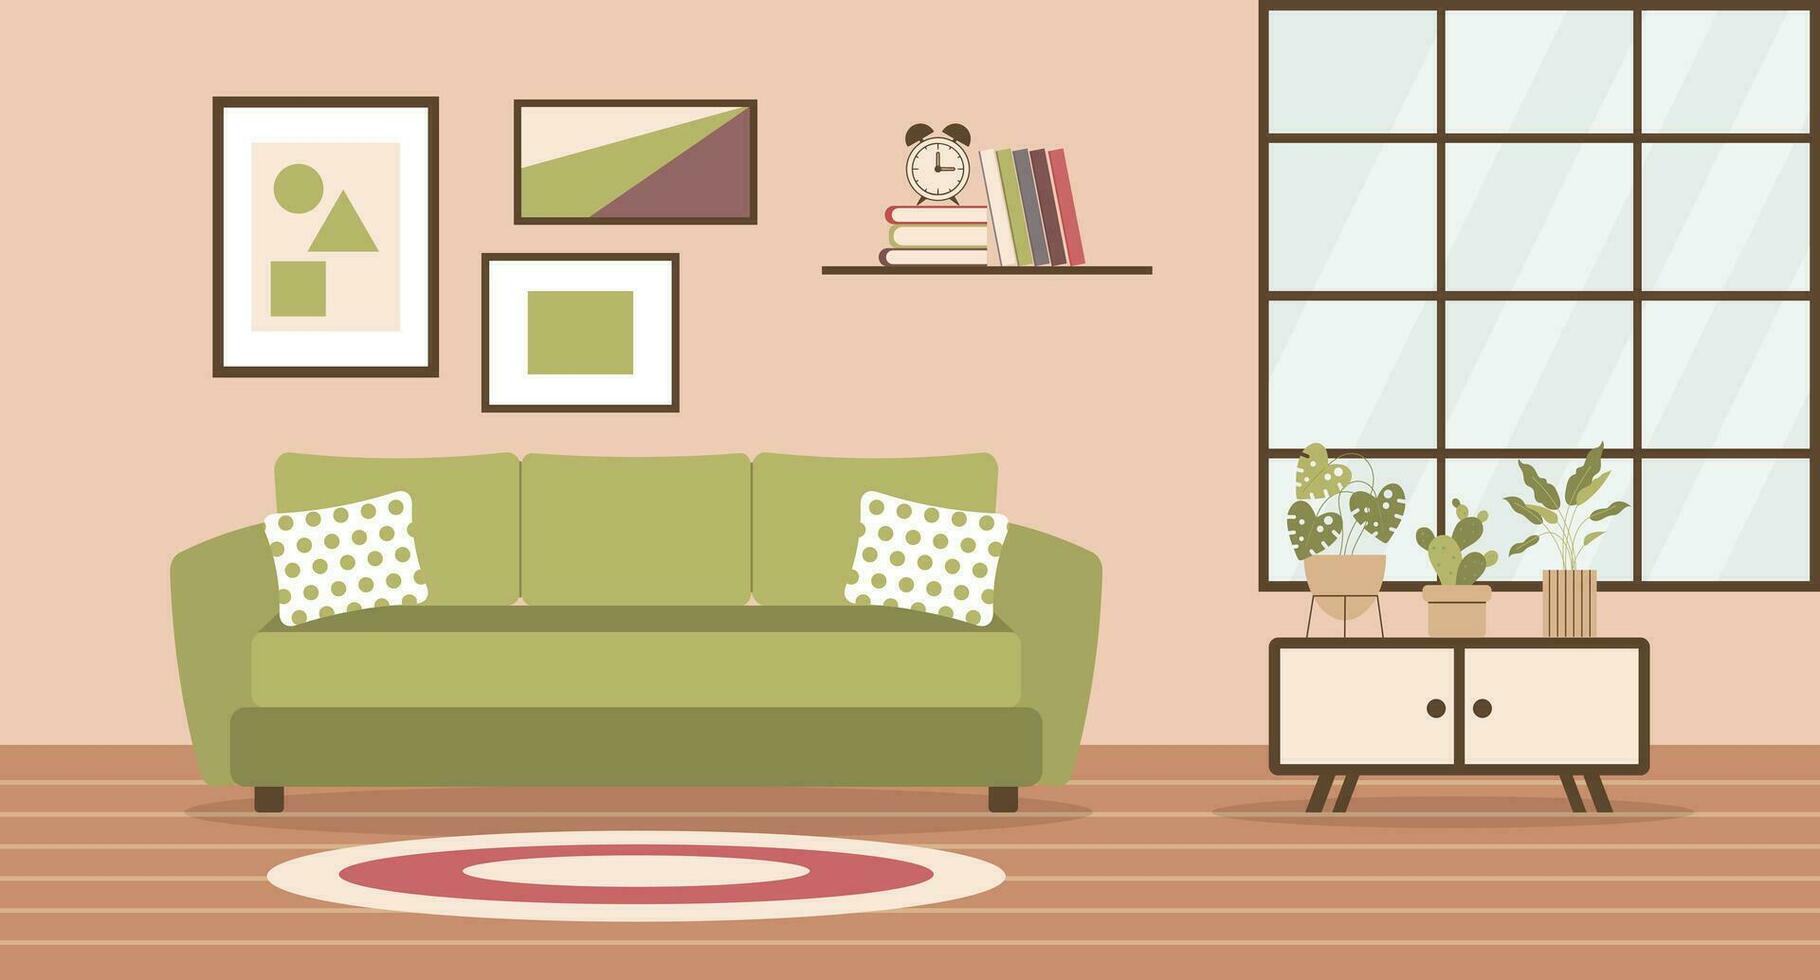 Living room with sofa, home plants on the bedside table, window, bookshelf and paintings on the wall. Flat interior in minimal style, vector